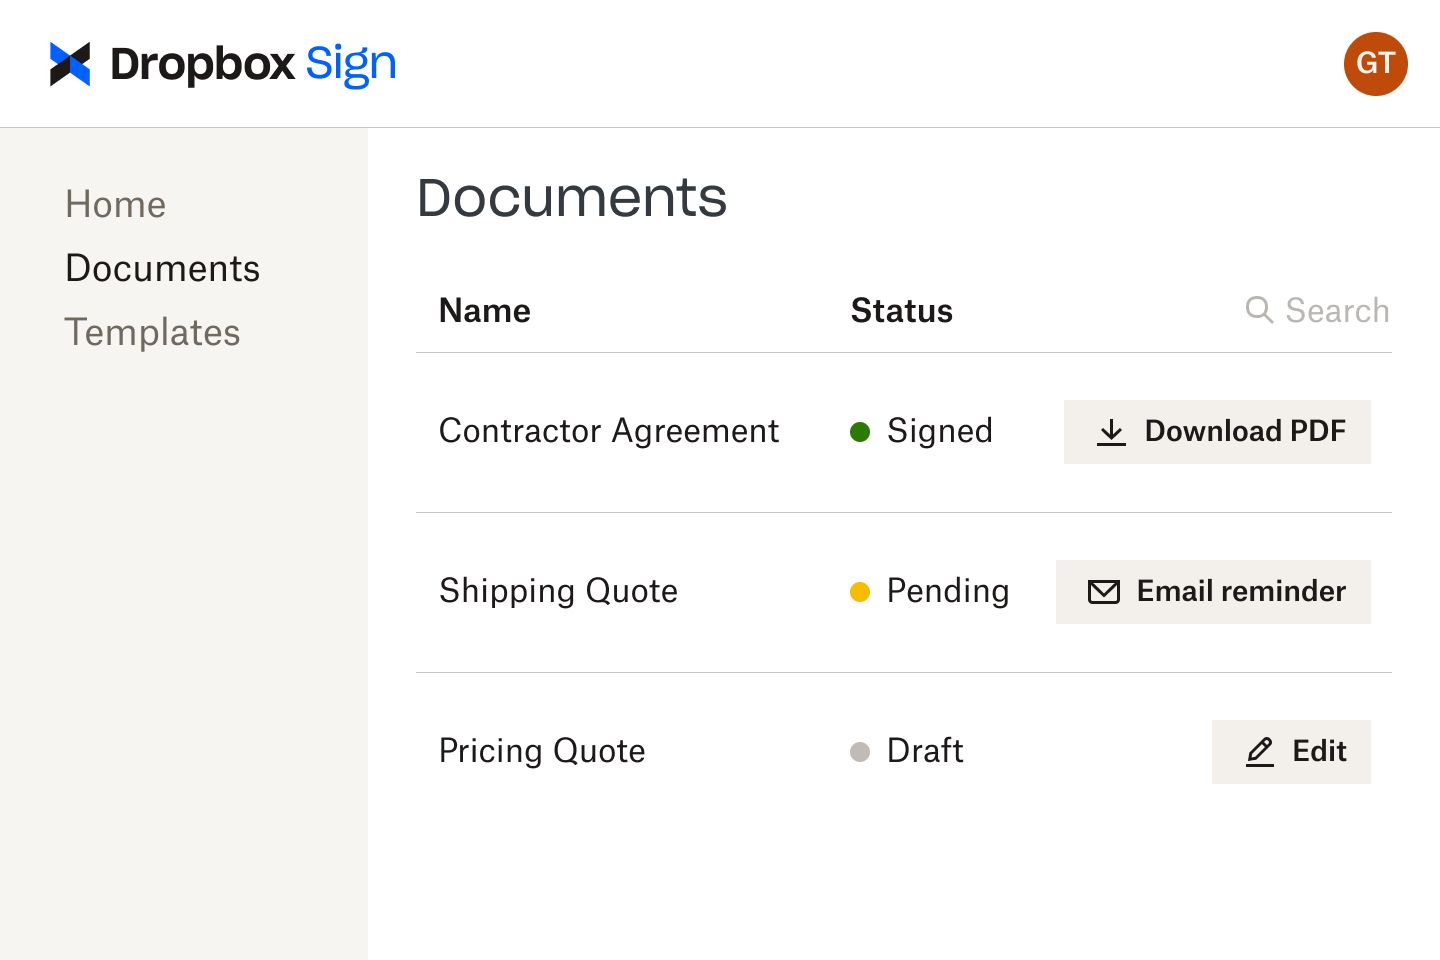 Managing stored documents in Dropbox Sign